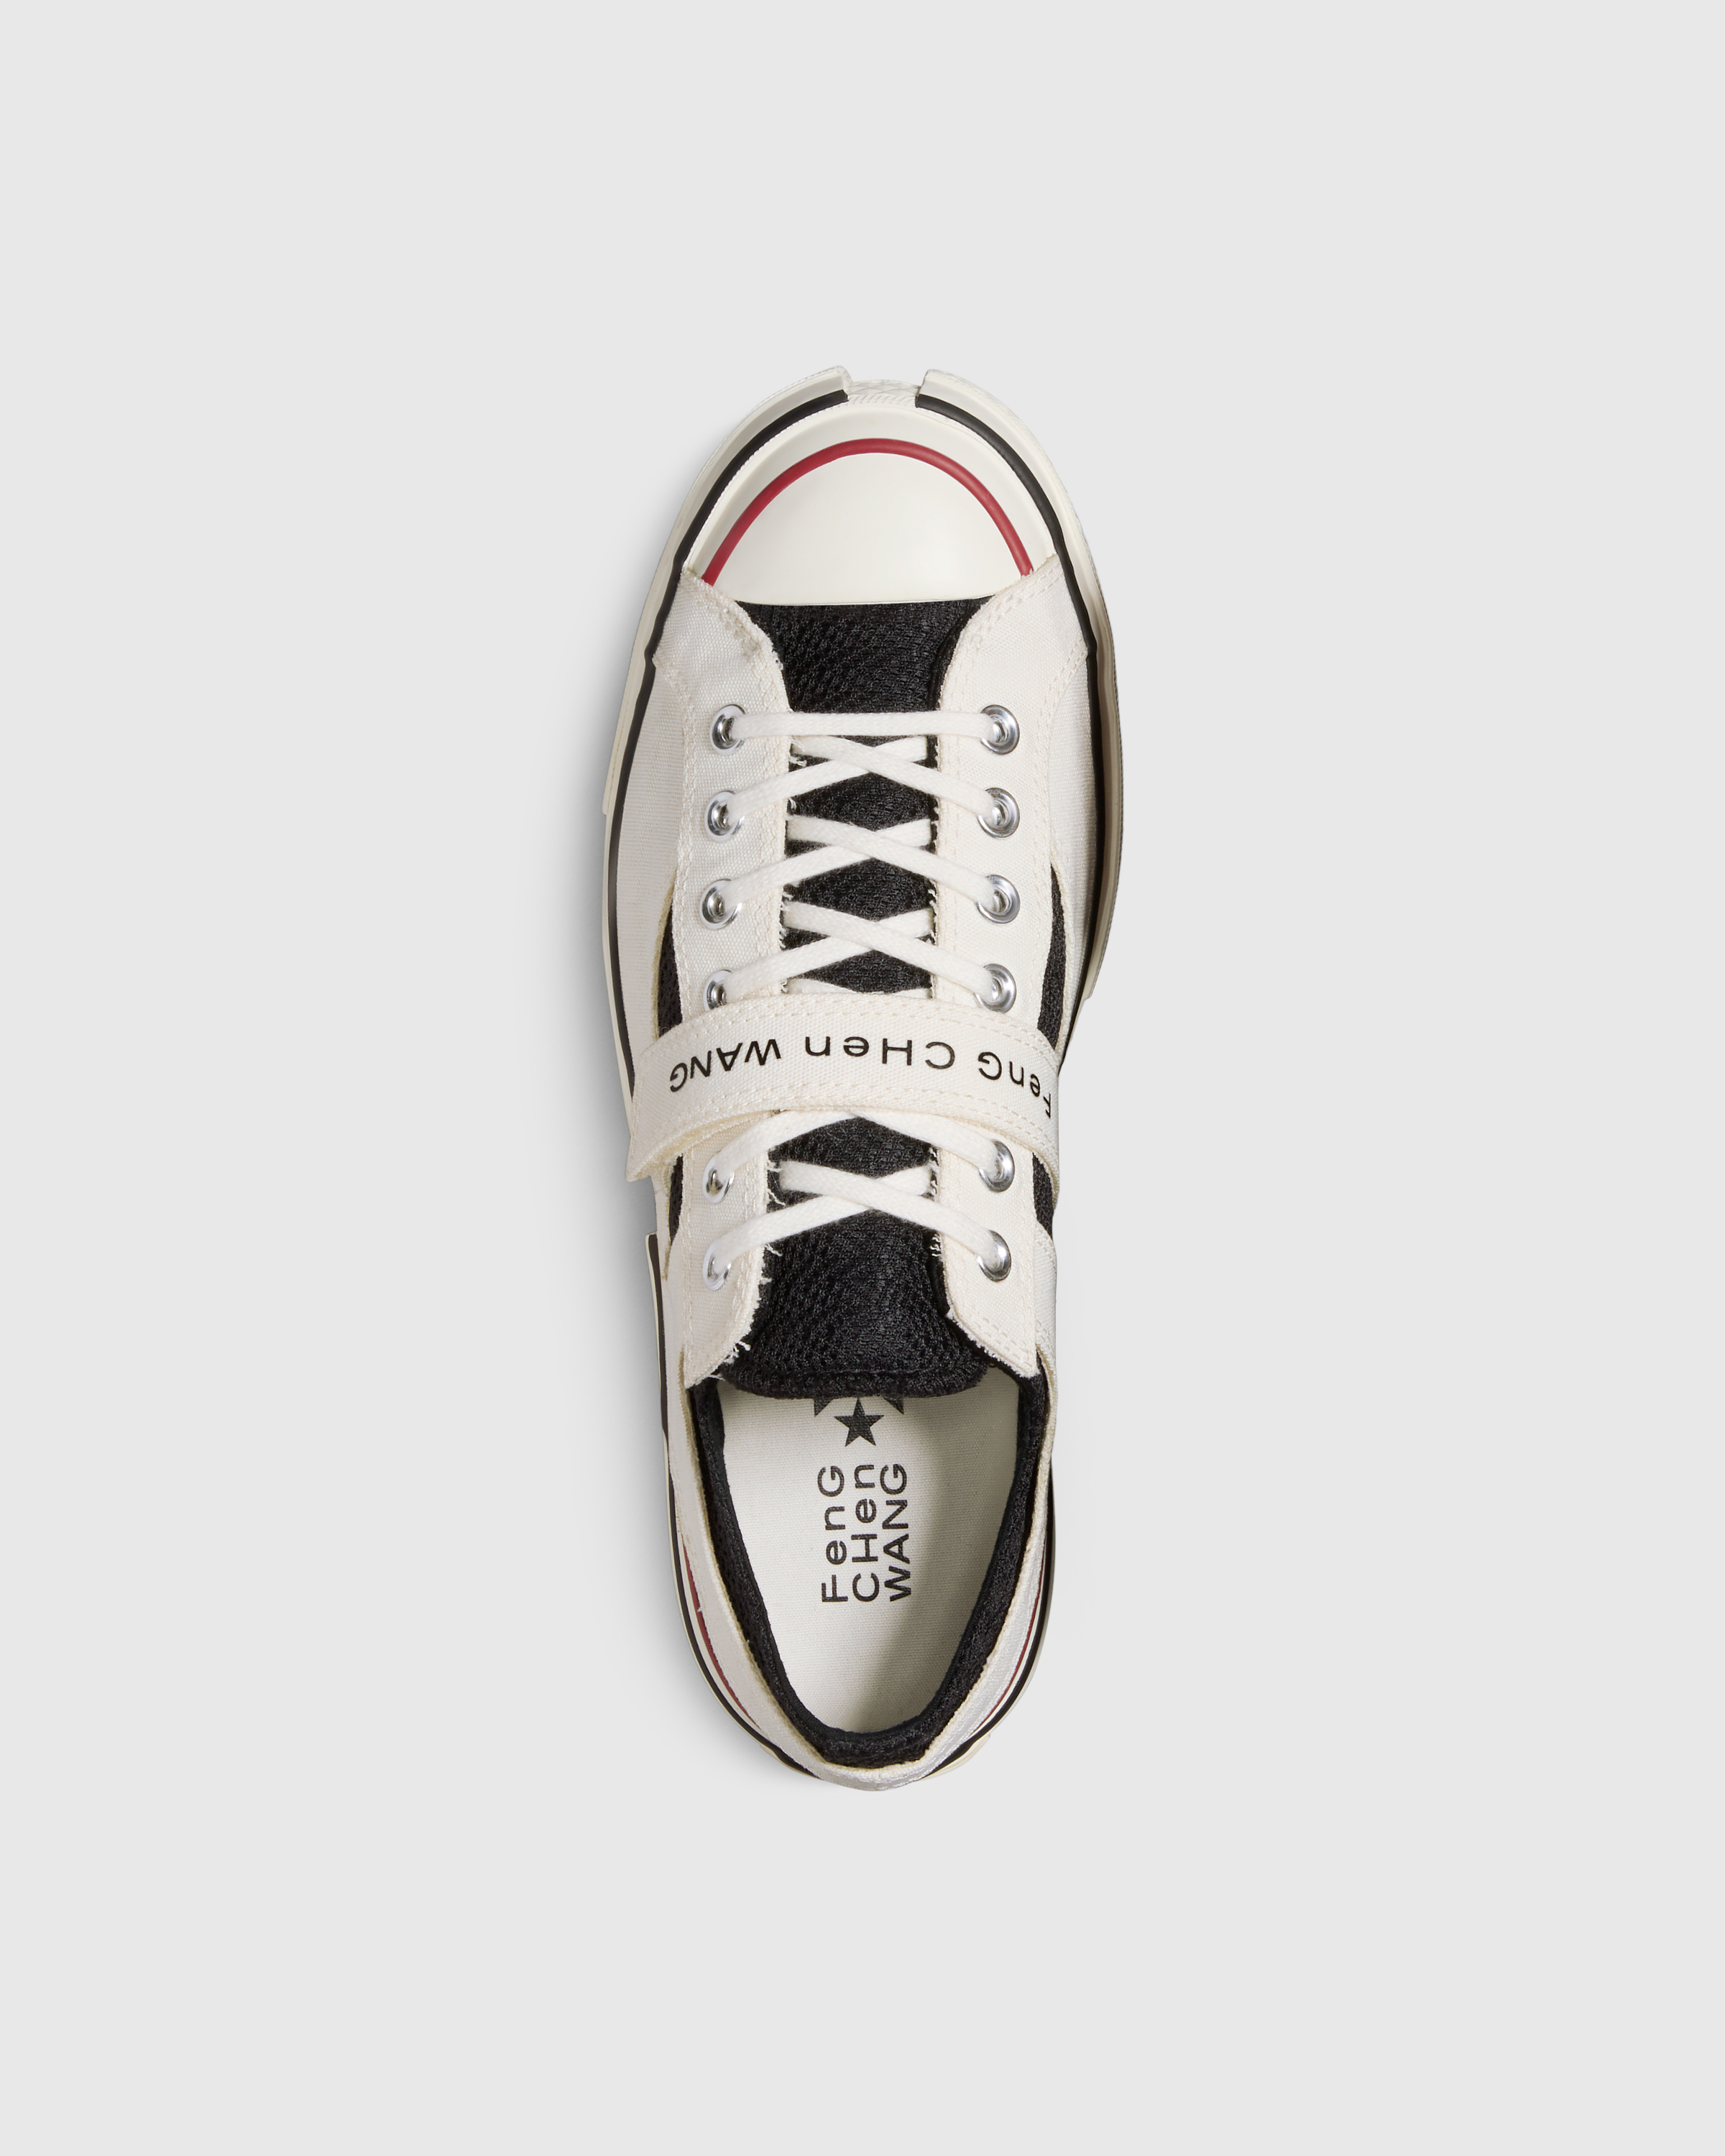 Feng Chen Wang x Converse – 2-in-1 Chuck 70 Black/Egret/Black - Low Top Sneakers - Black - Image 5